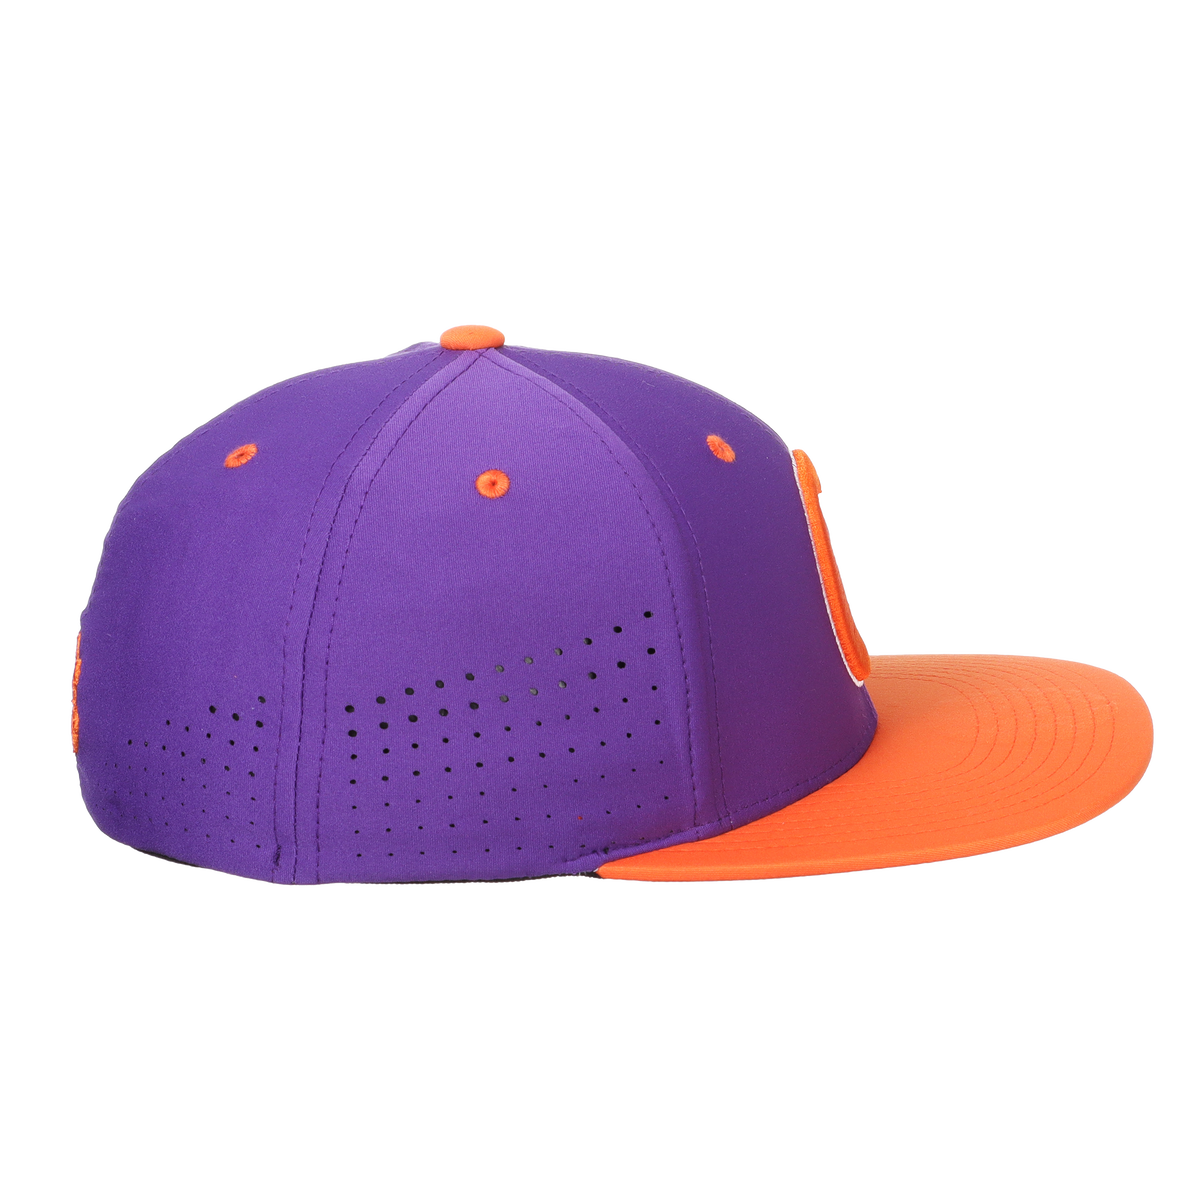 Clemson Hyper-Cool Purple Crown with Orange Bill Flex Stretch Fitted Hat with Baseball C in Purple